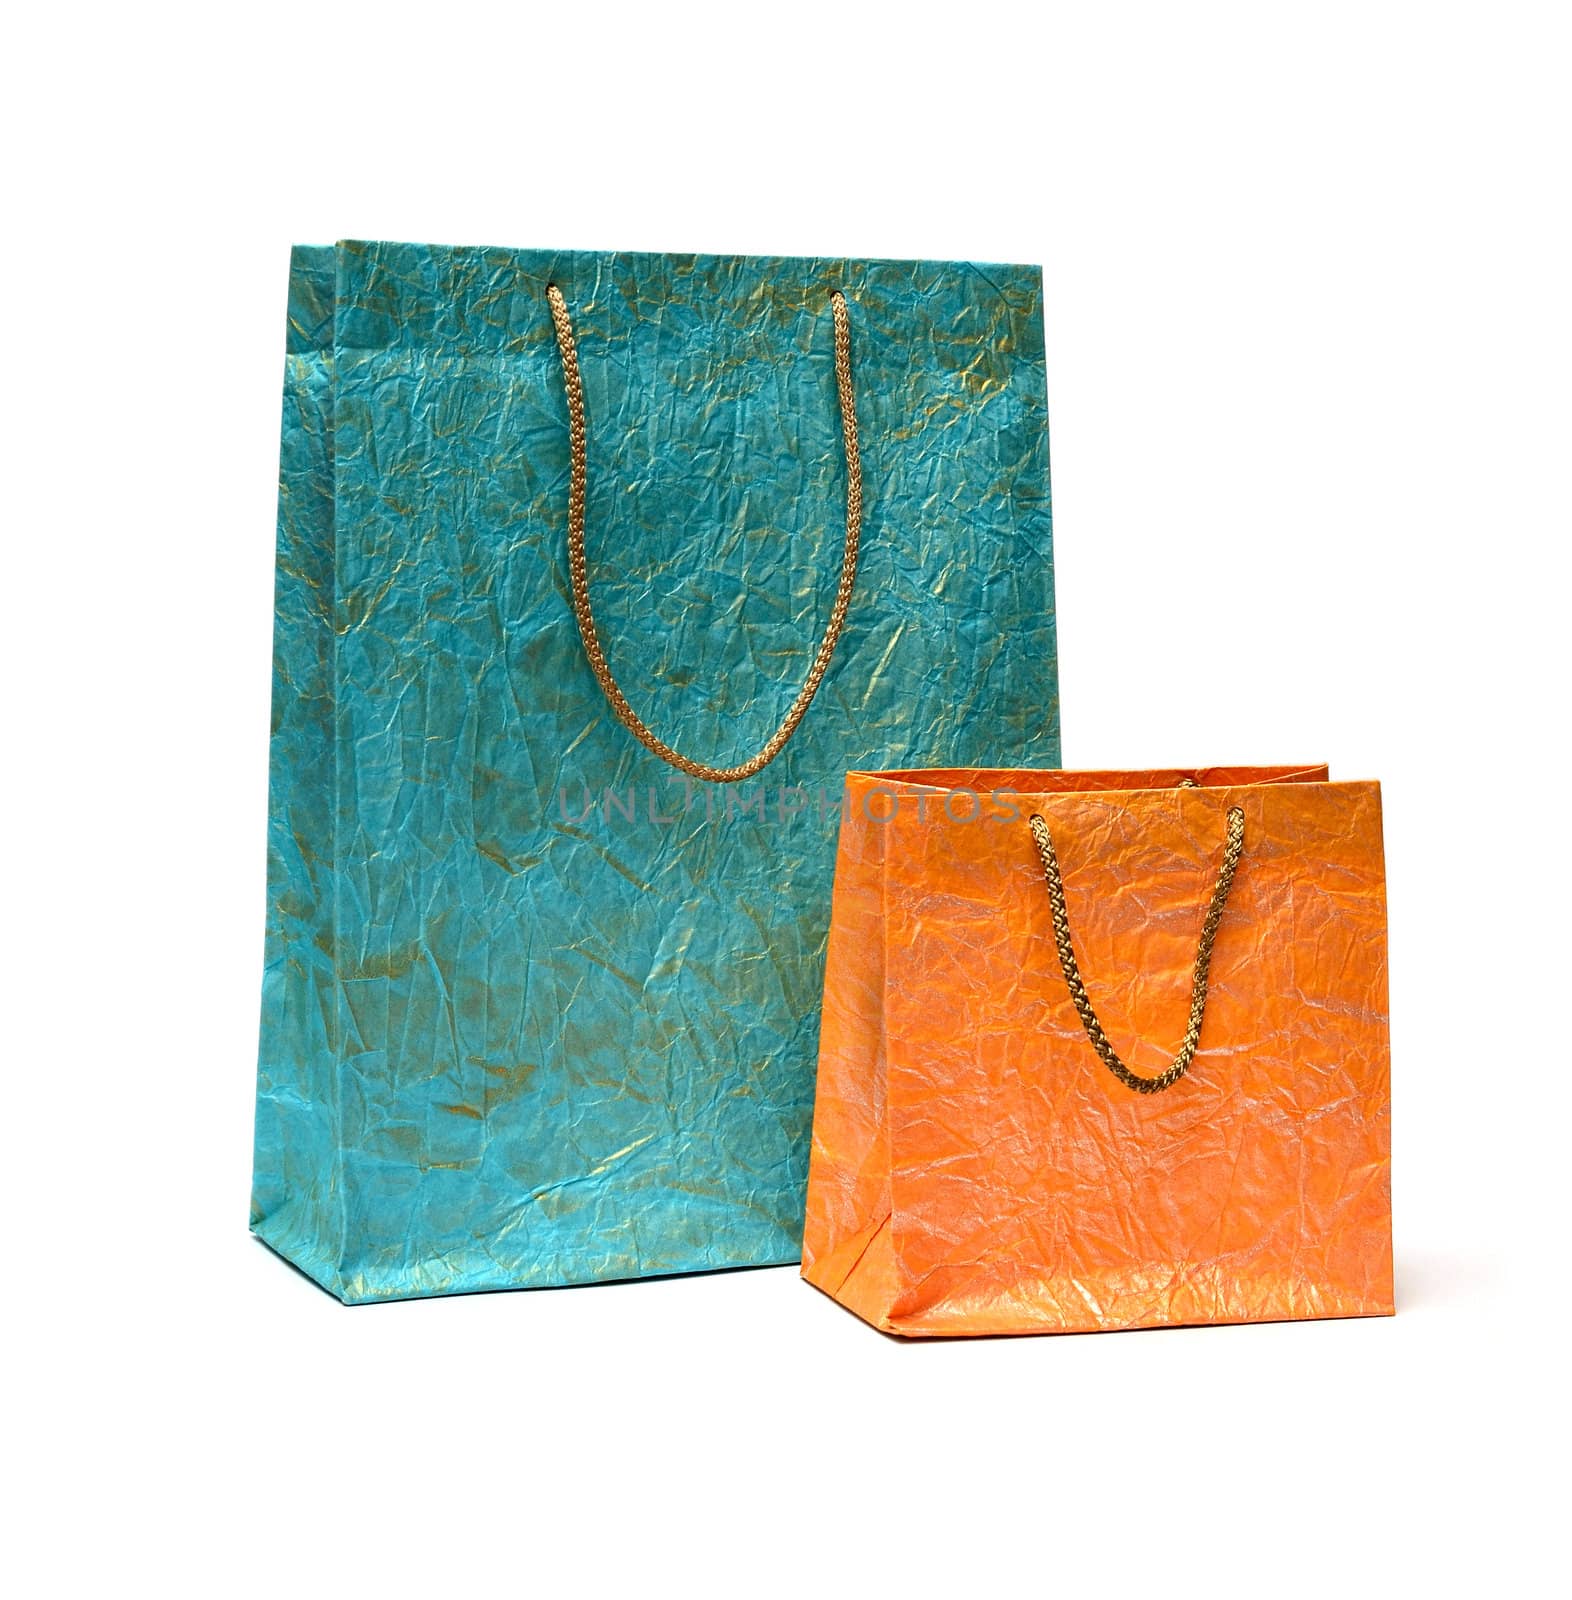 Two paper shopping bags on white background